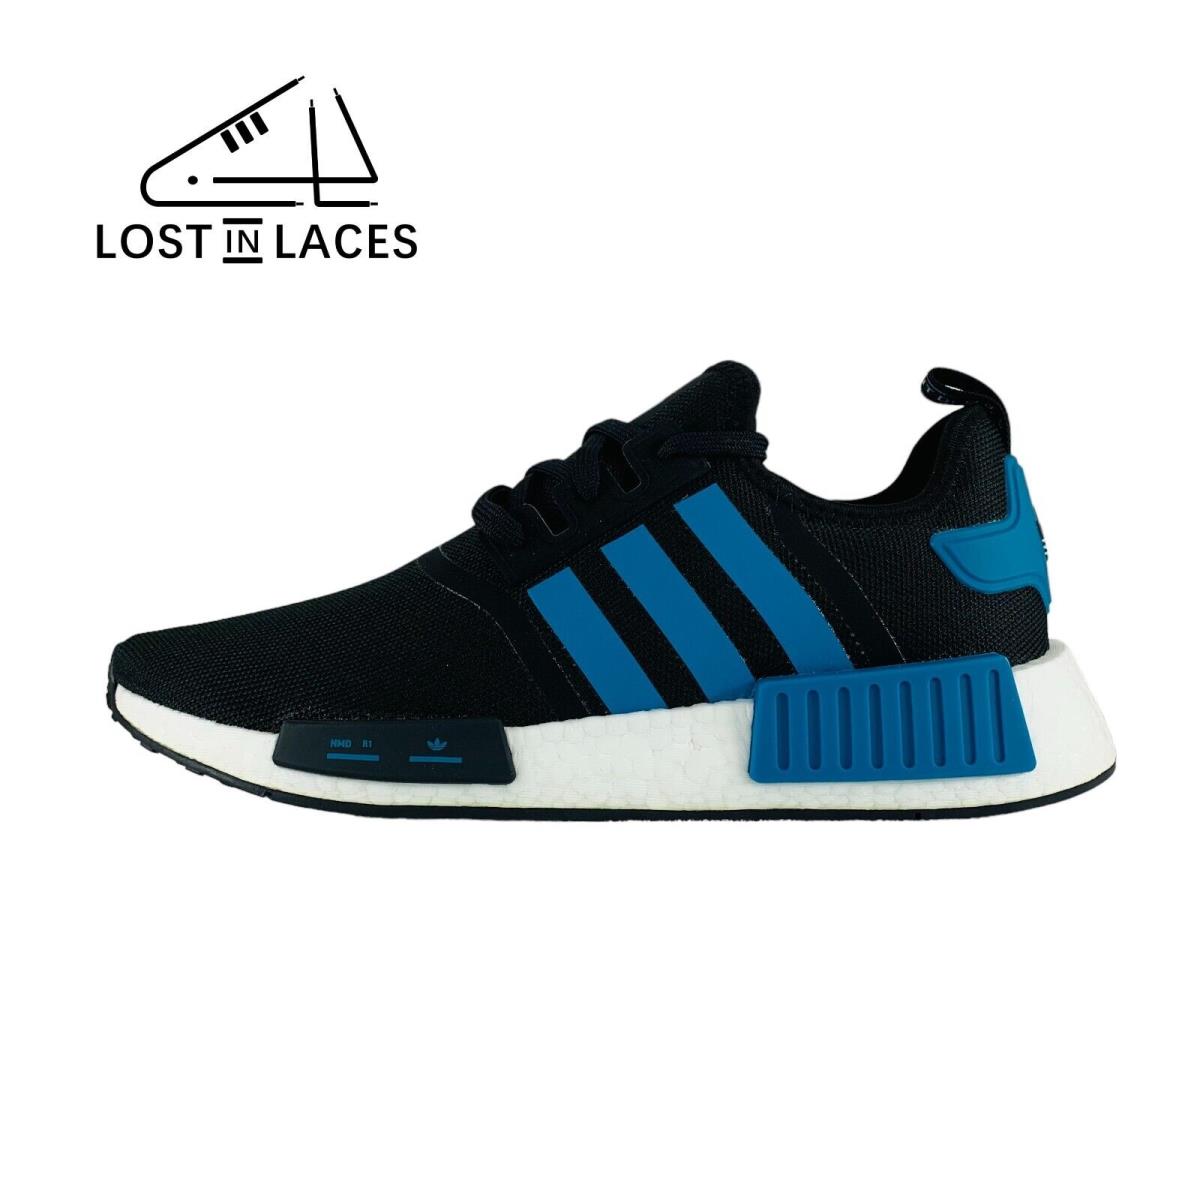 Adidas NMD_R1 Black Active Teal Lifestyle Sneakers Shoes Men`s Sizes